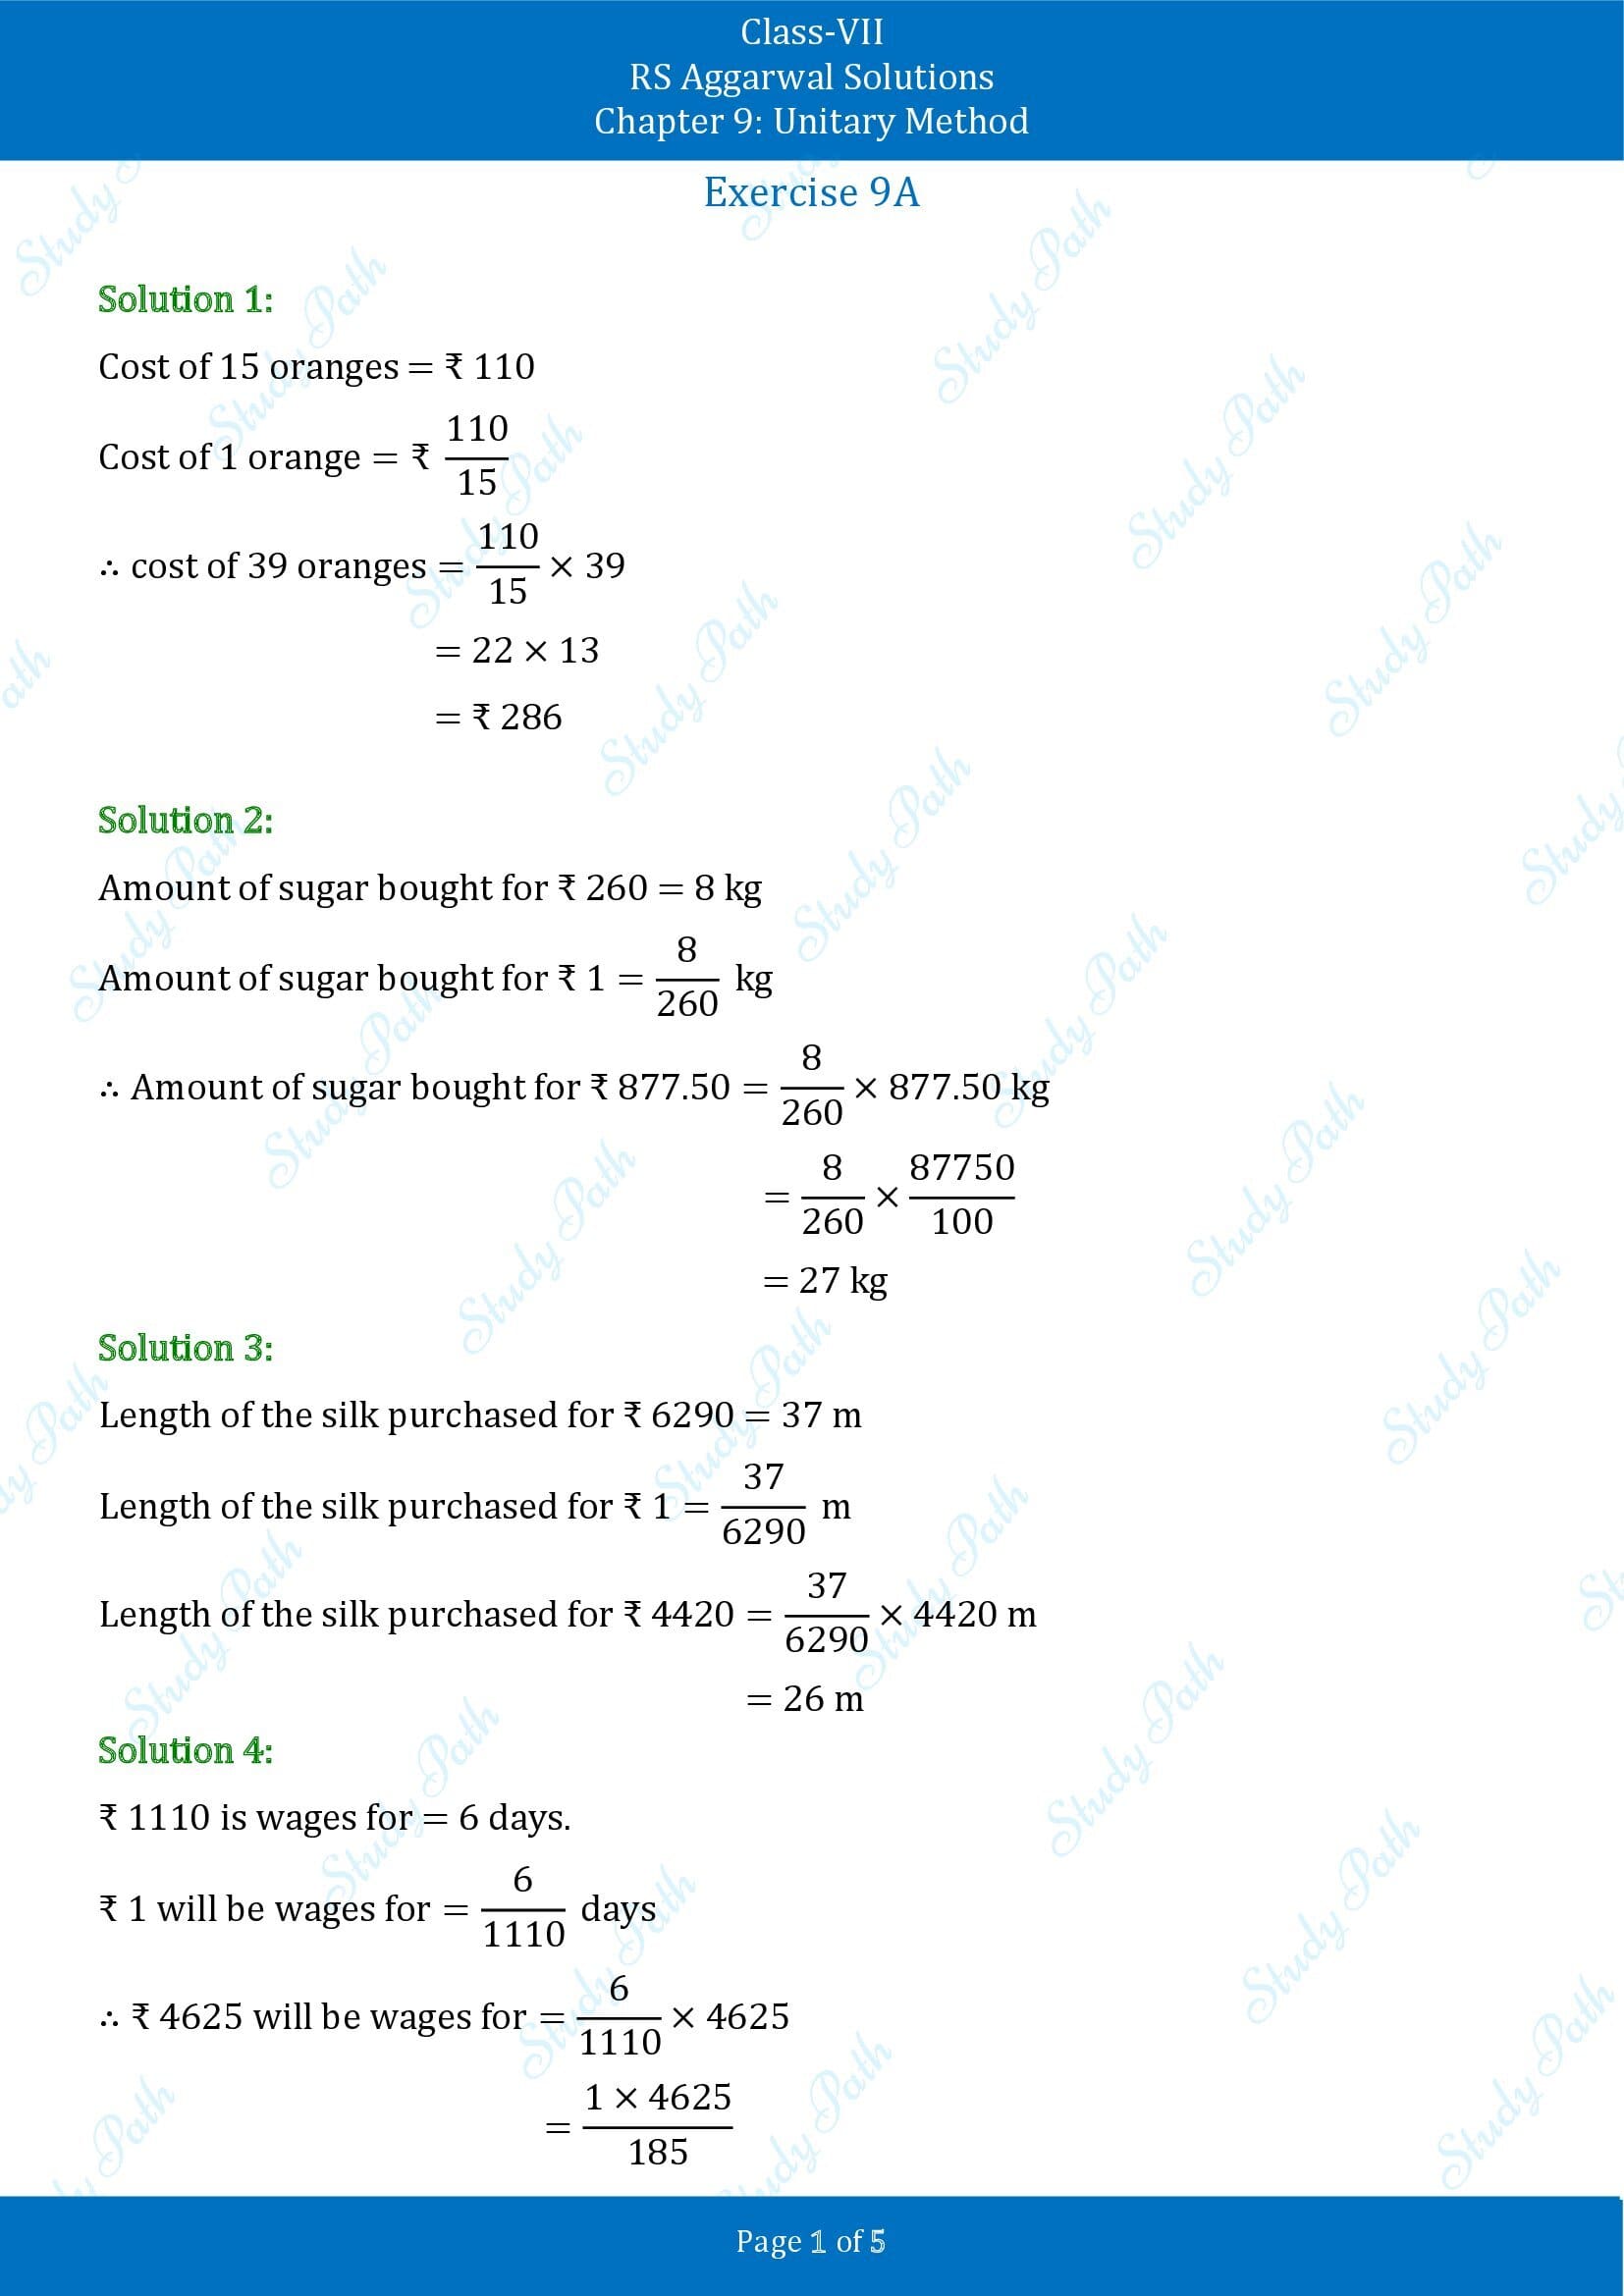 RS Aggarwal Solutions Class 7 Chapter 9 Unitary Method Exercise 9A 00001